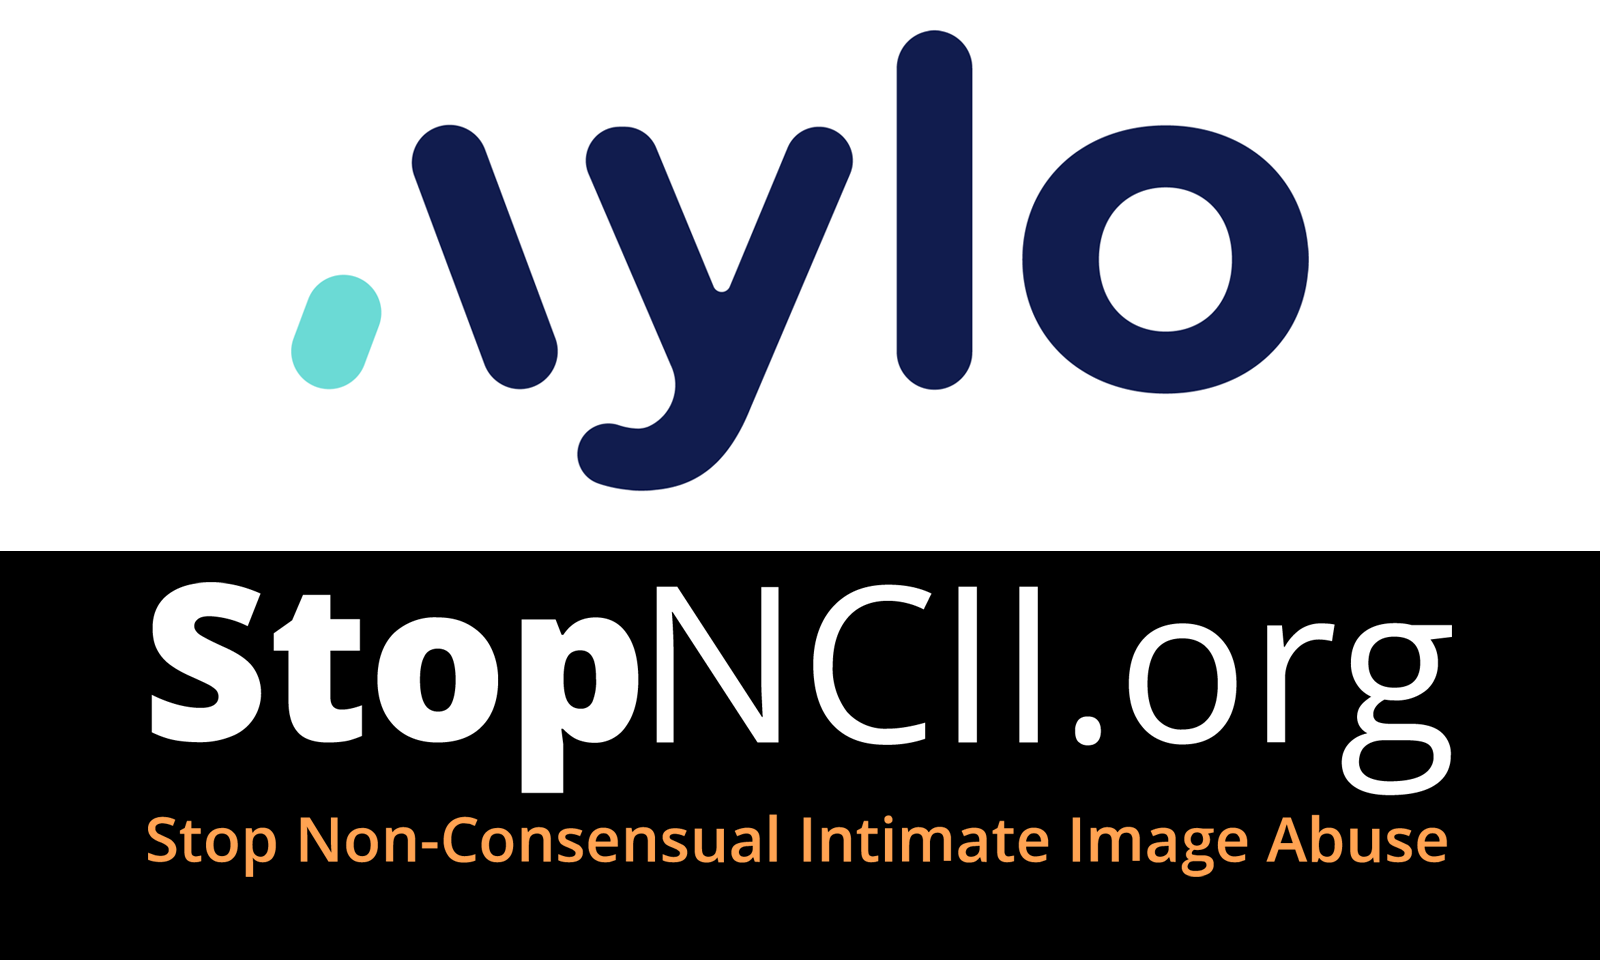 Aylo Teams With StopNCII.org to Fight Non-Consensual Images